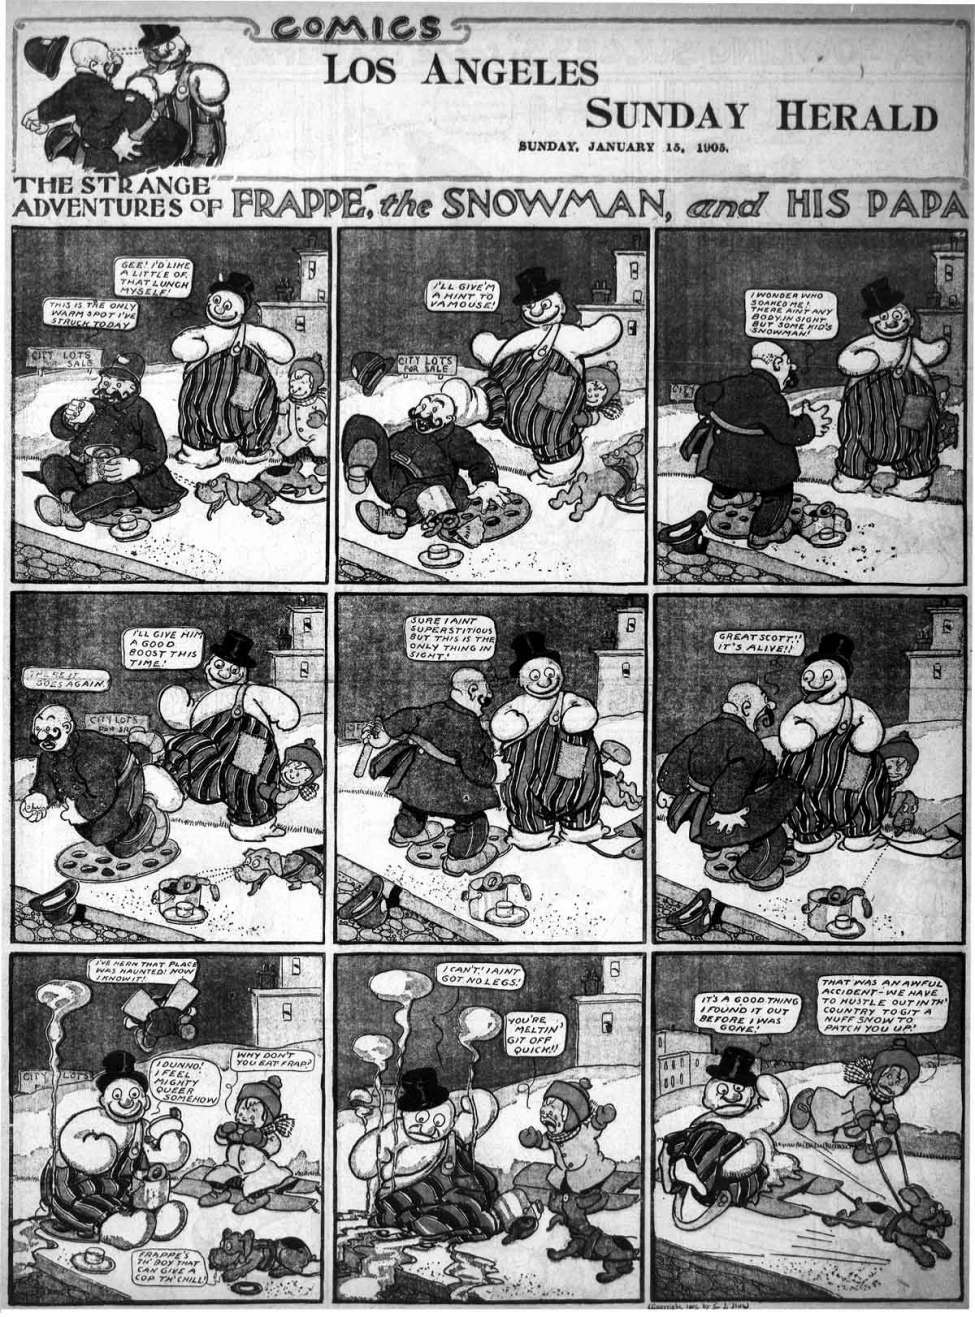 Comic Book Cover For The Strange Adventures of Frappe the Snowman and His Papa